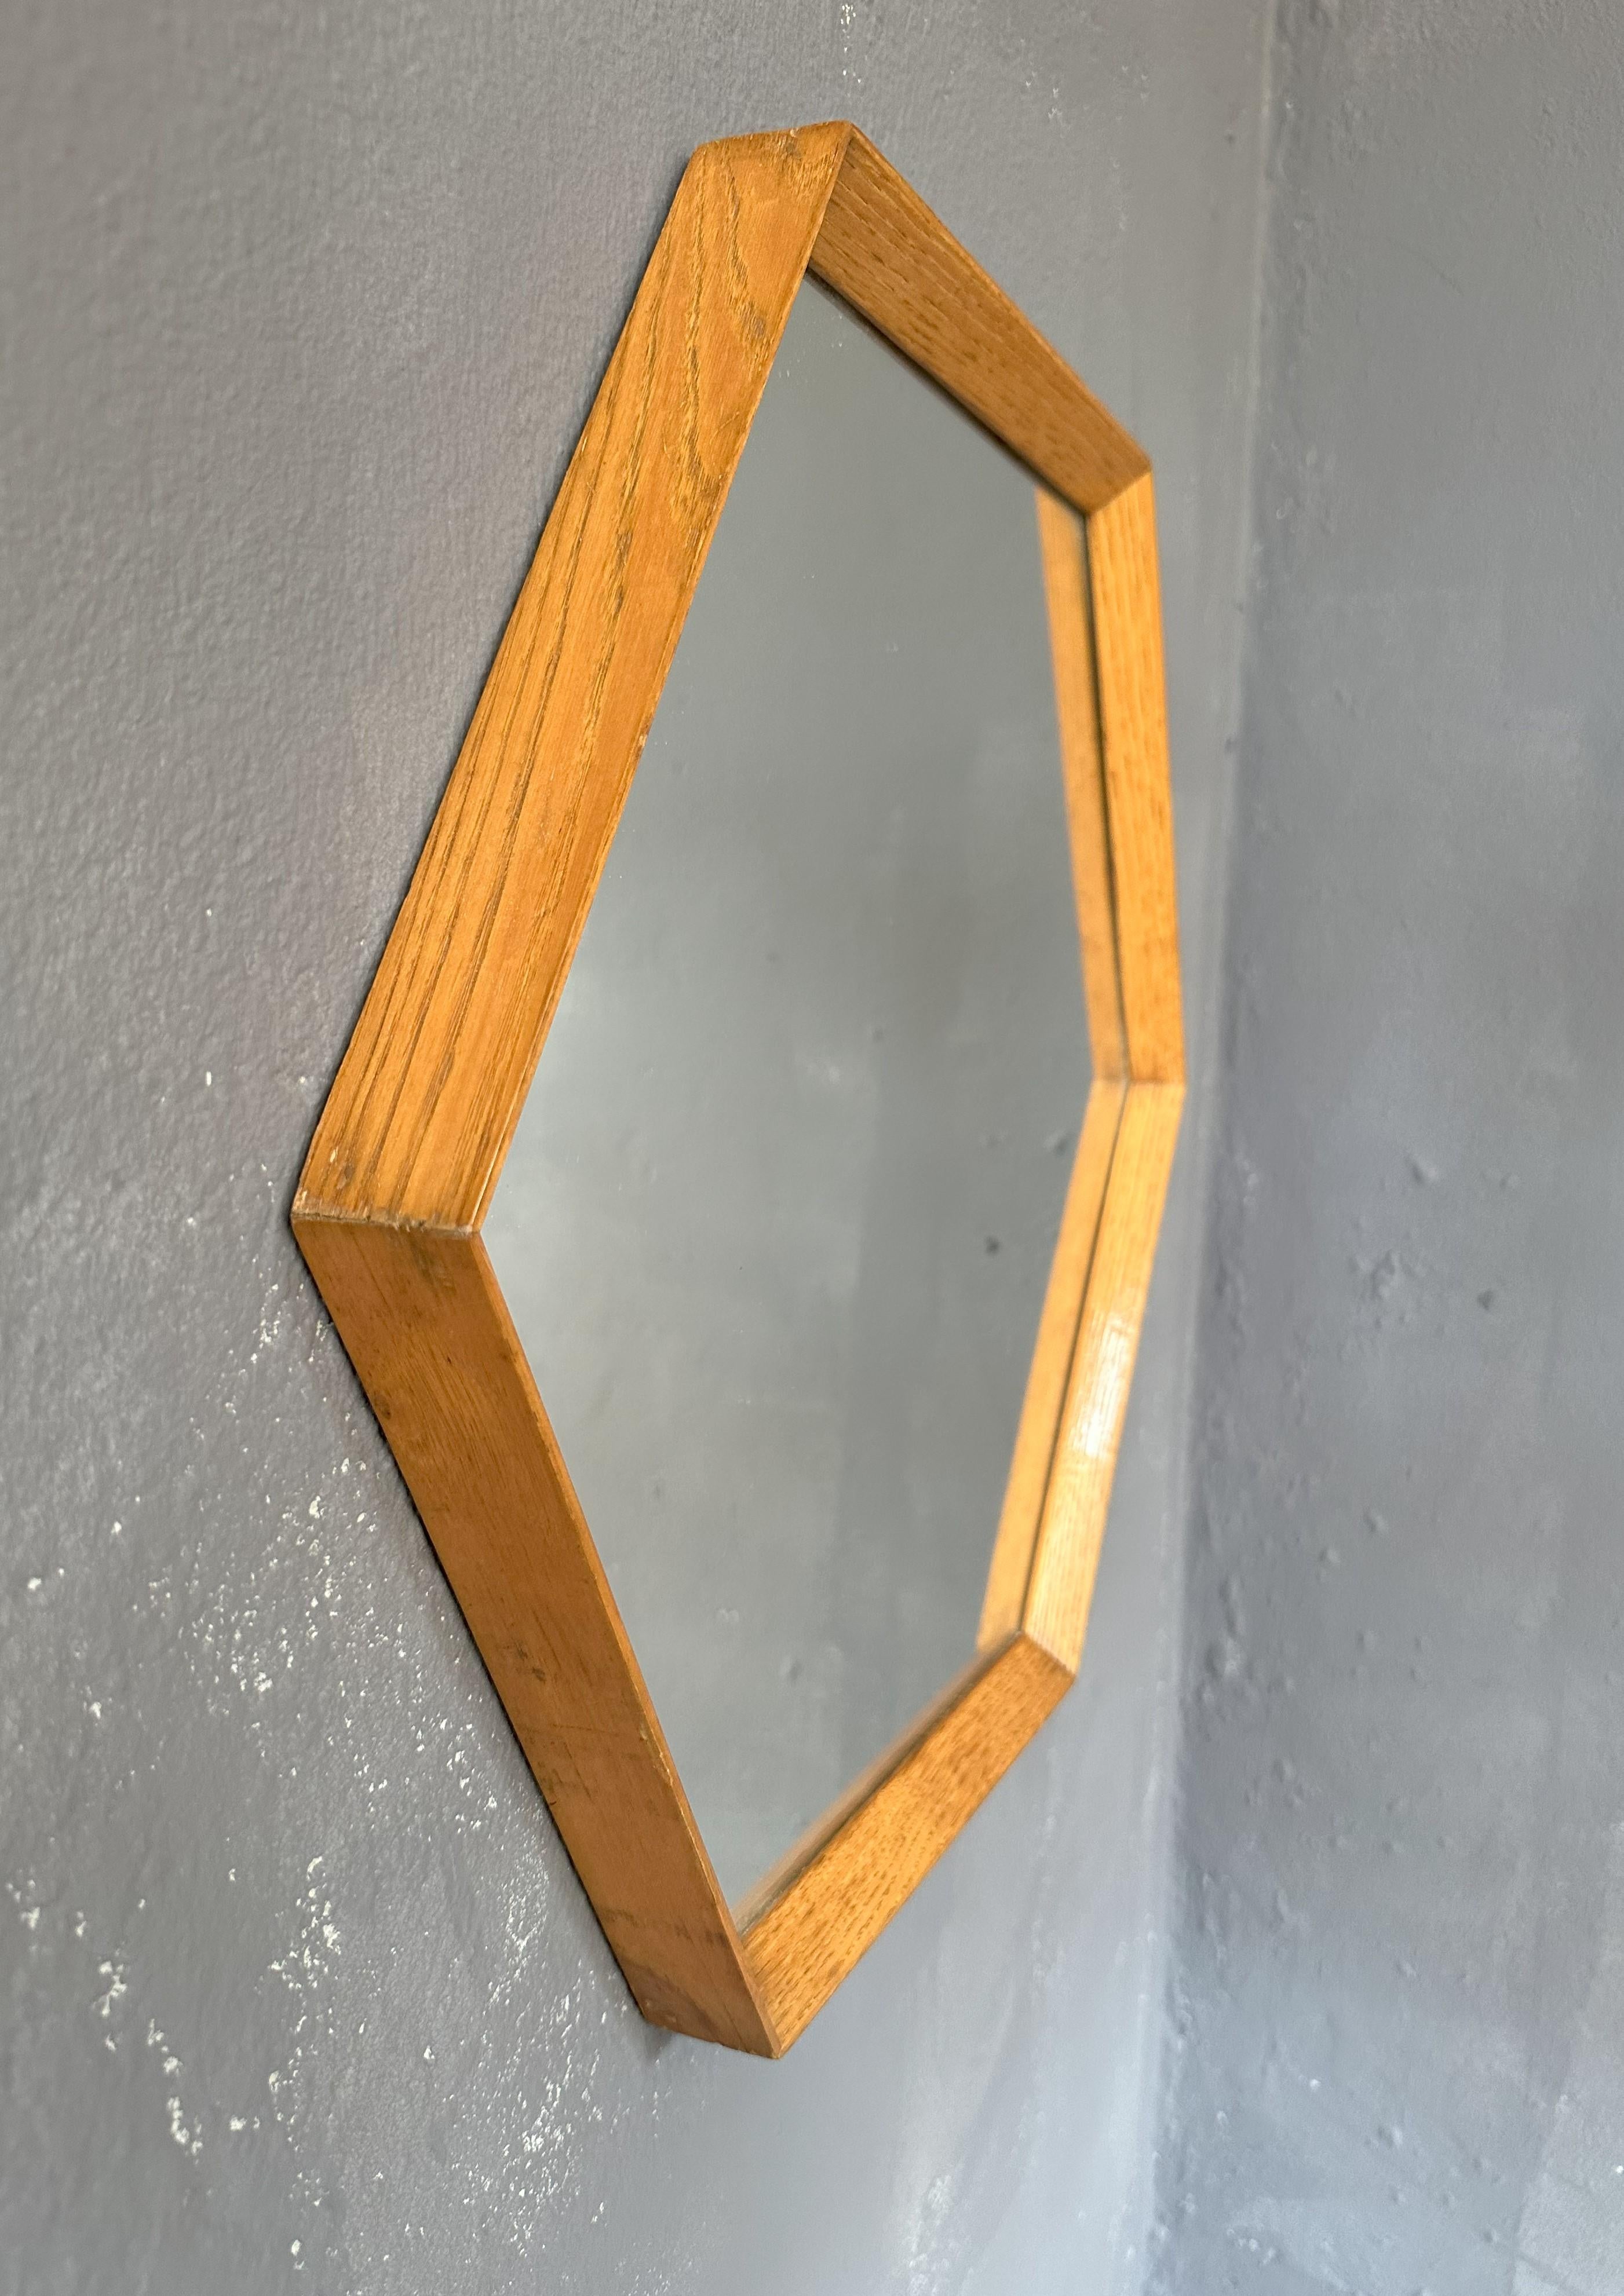 Mid-20th Century Mid-Century Modern hexagonal Mirror with oak wood frame 1960 Italian manufacture For Sale